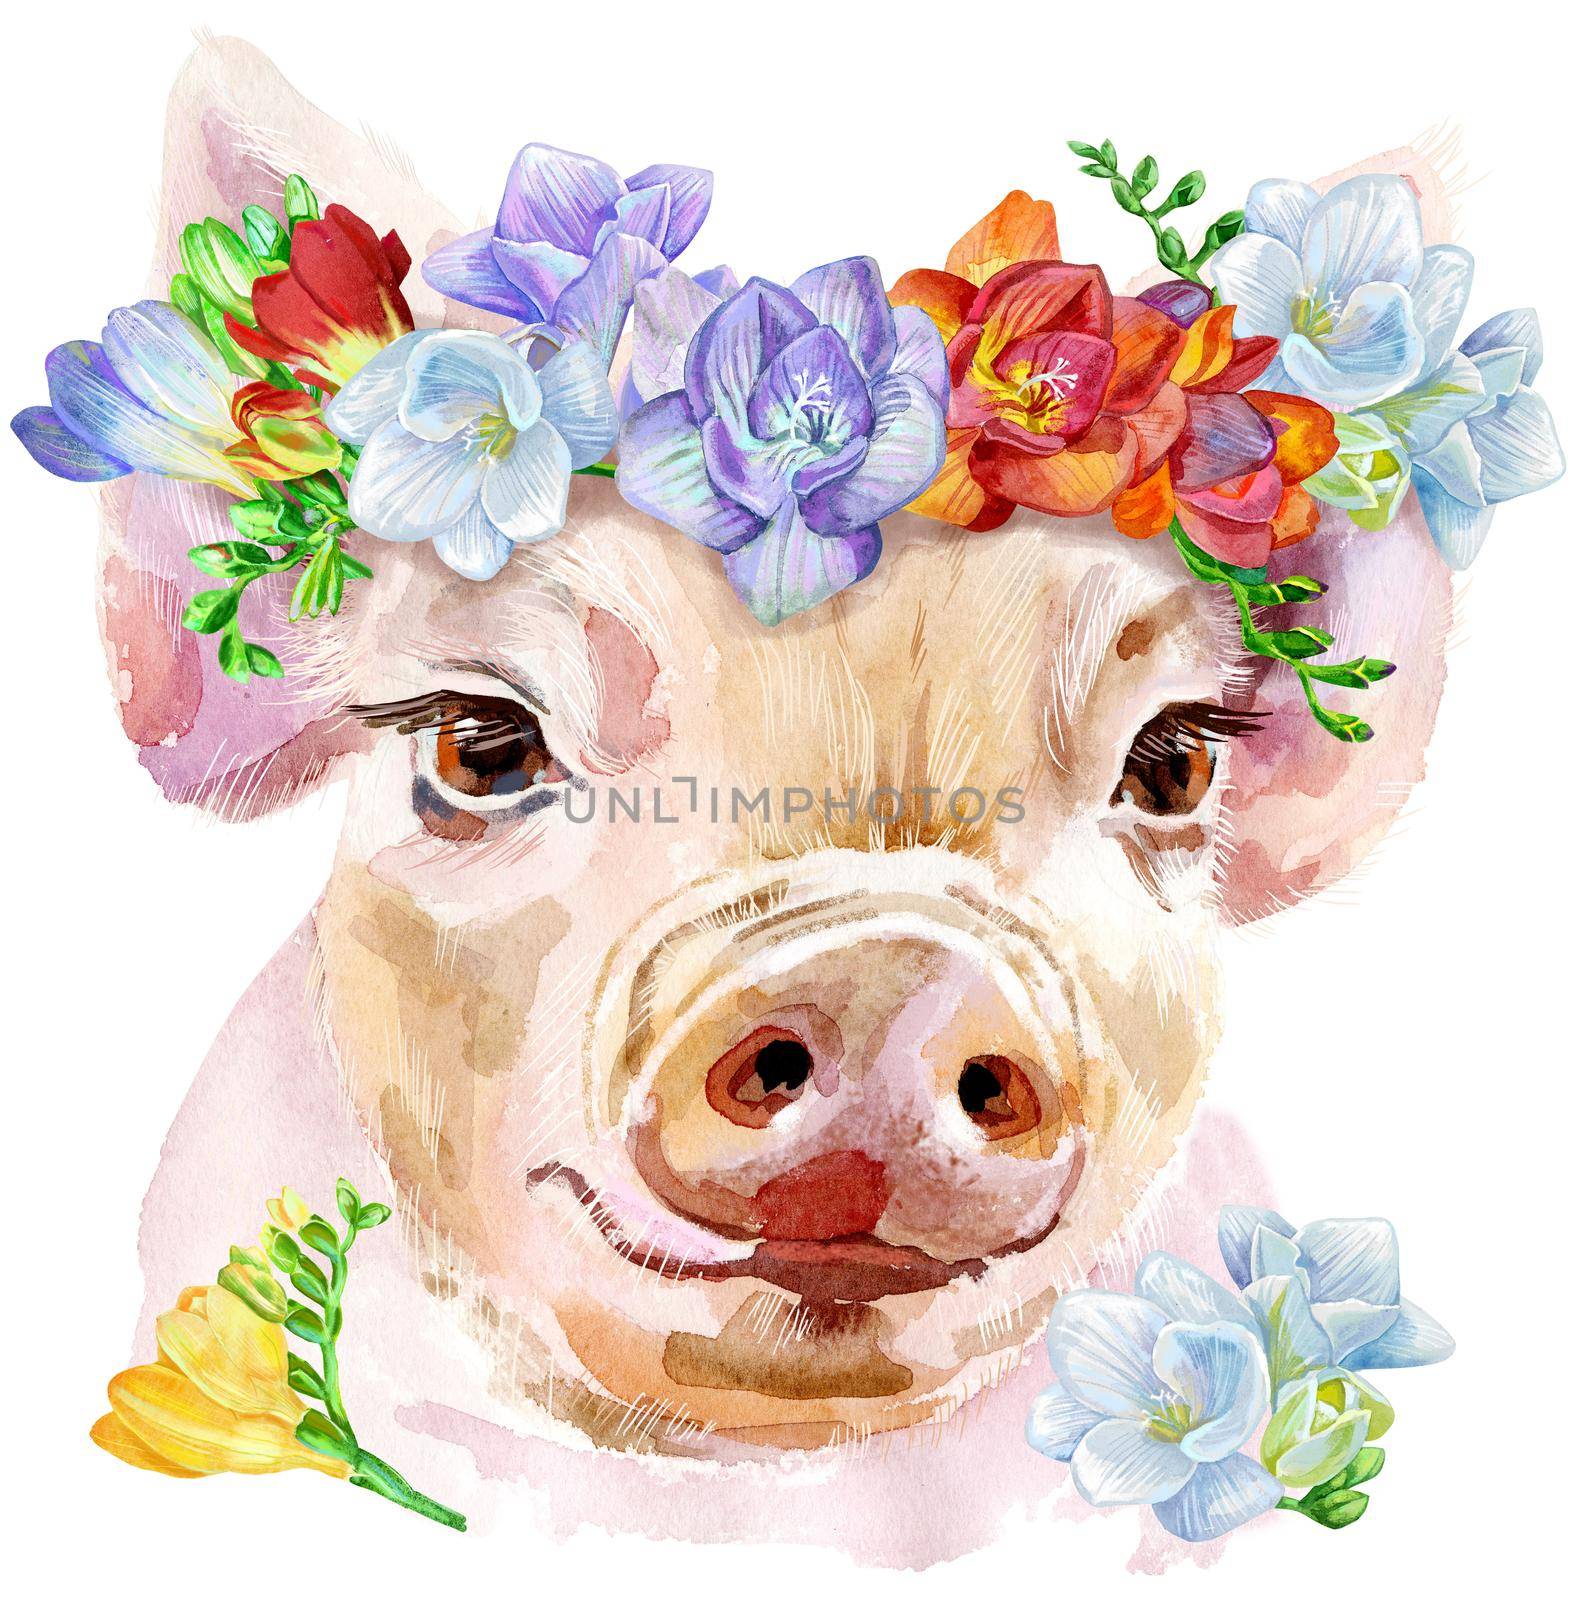 A beautiful pig in a wreath of freesia. Flowers. Watercolor illustration with splashes.